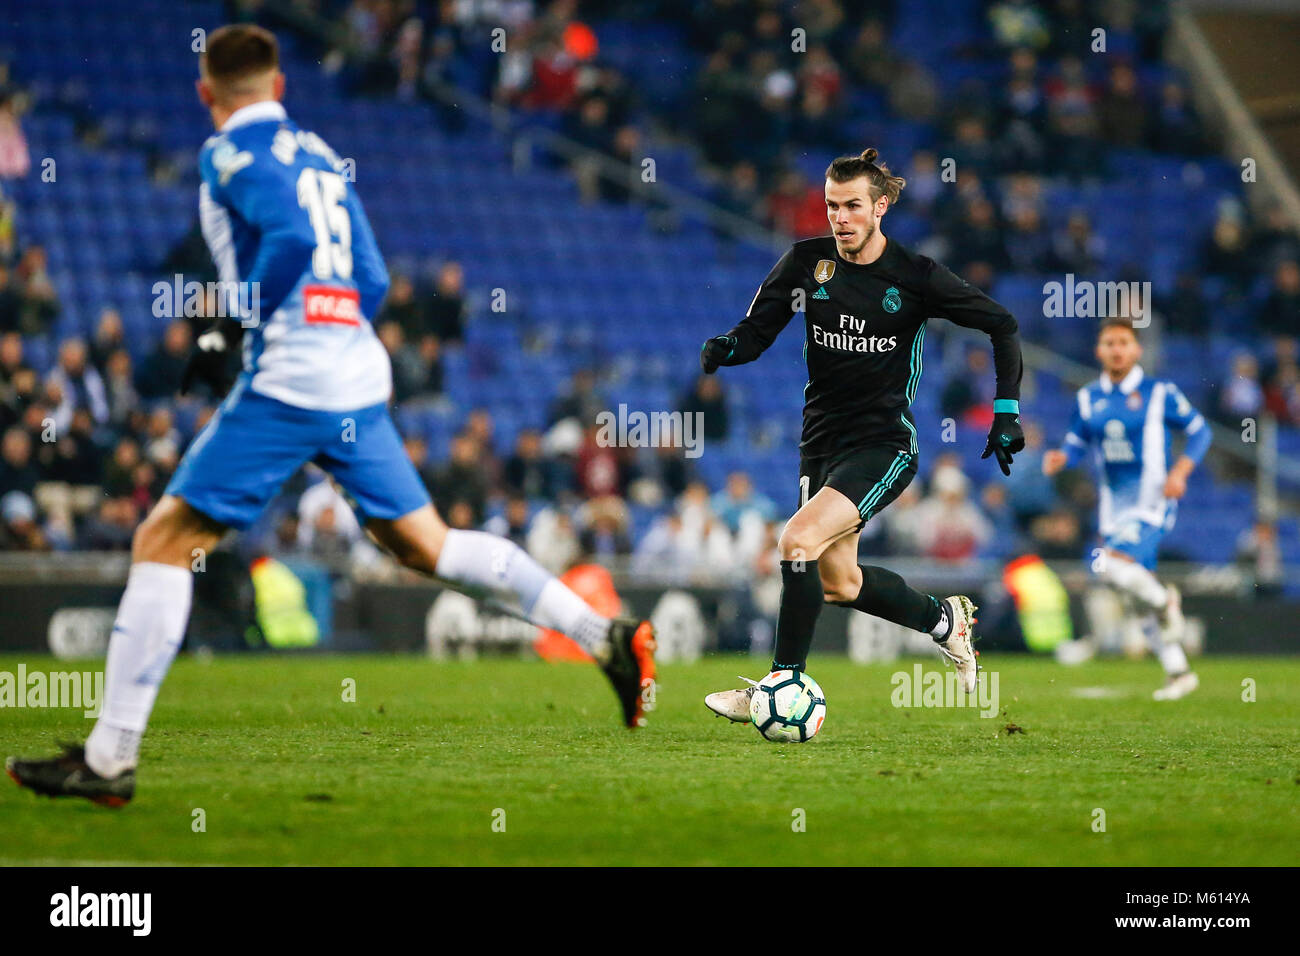 Barcelona, Spain. 27th Feb, 2018. Bale during the match between RCD Espanyol v Real Madrid, for the round 26 of the Liga Santander, played at RCDE Stadium on 27th February 2018 in Barcelona, Spain. Credit: Gtres Información más Comuniación on line, S.L./Alamy Live News Stock Photo